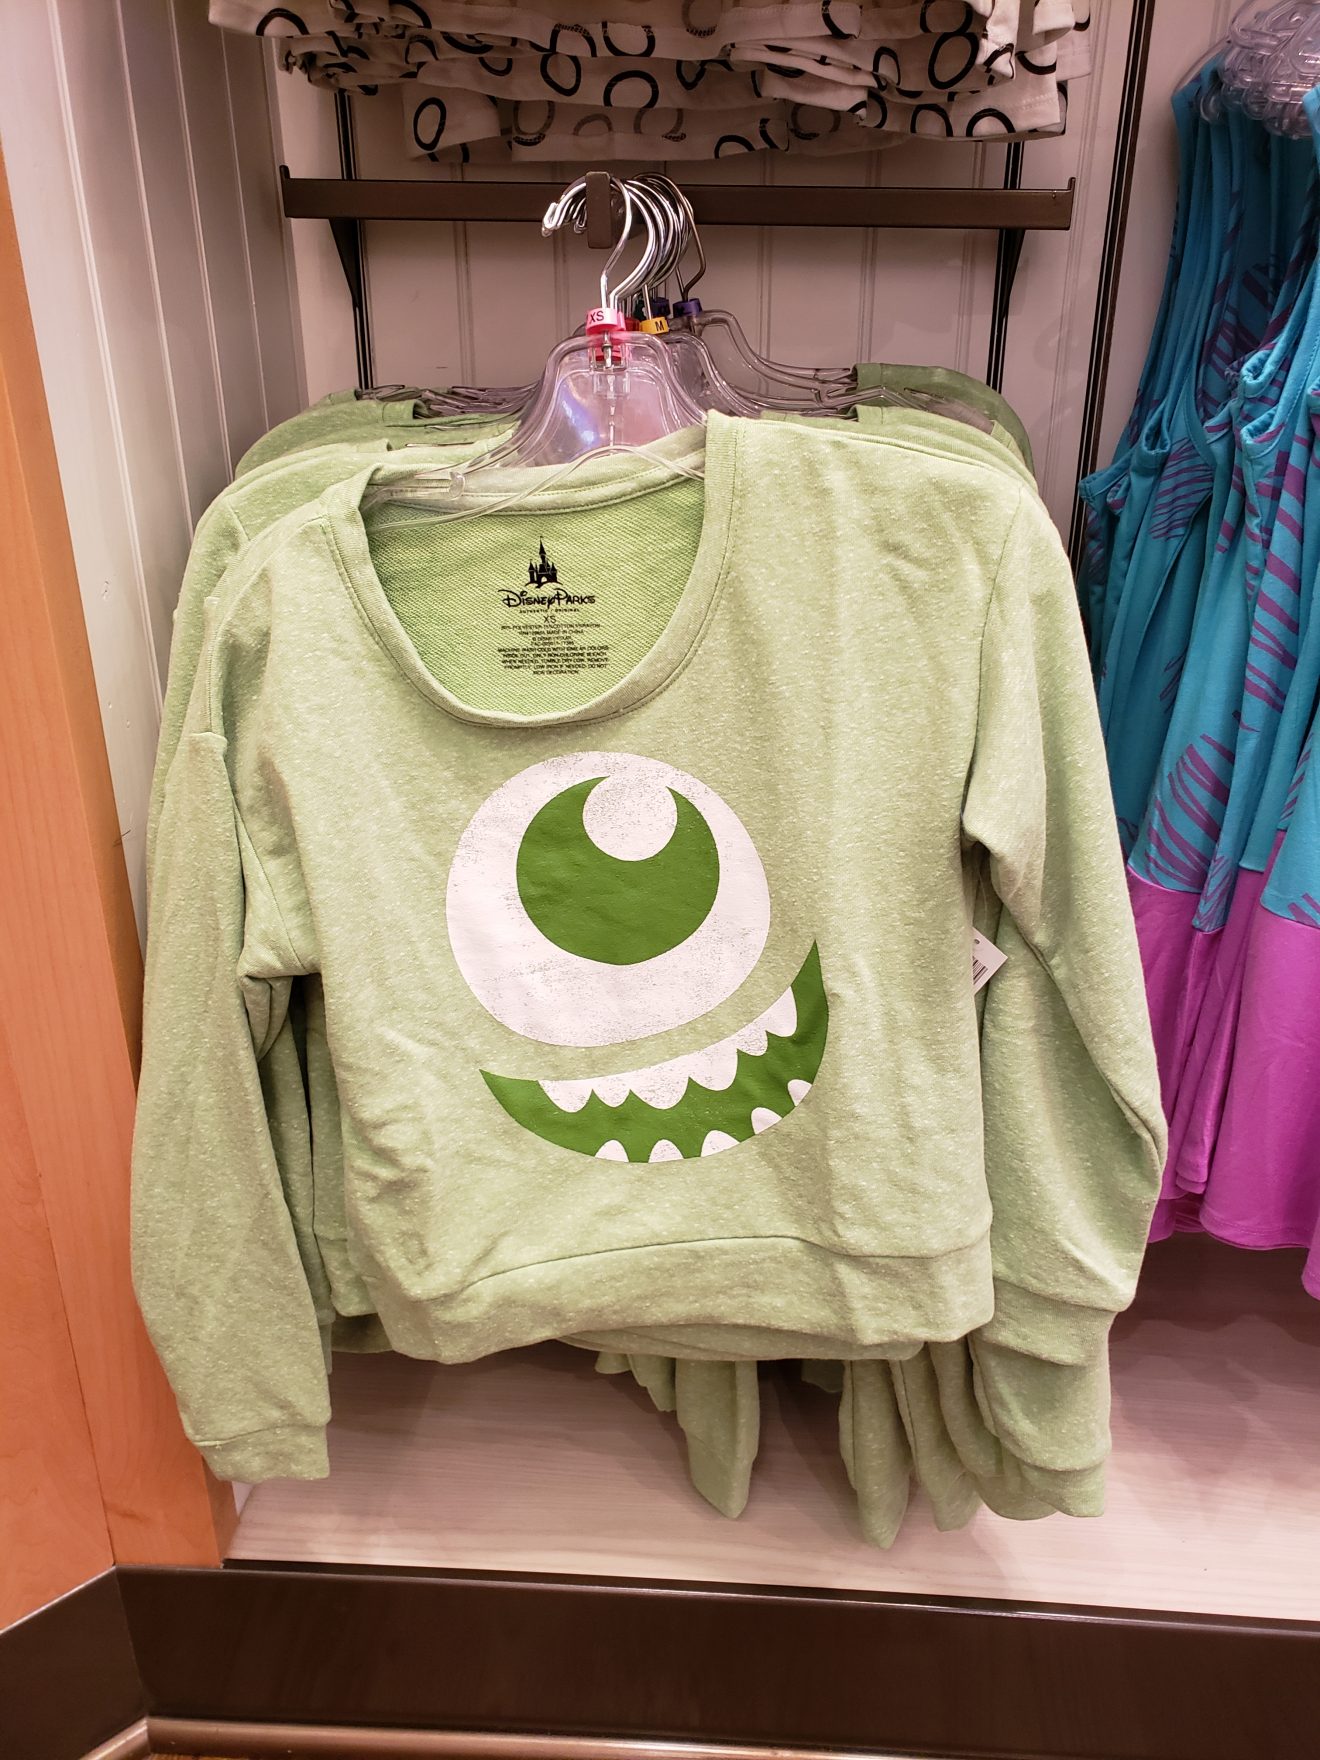 Scary Good Monsters inc. Merch Now Available! - Fashion